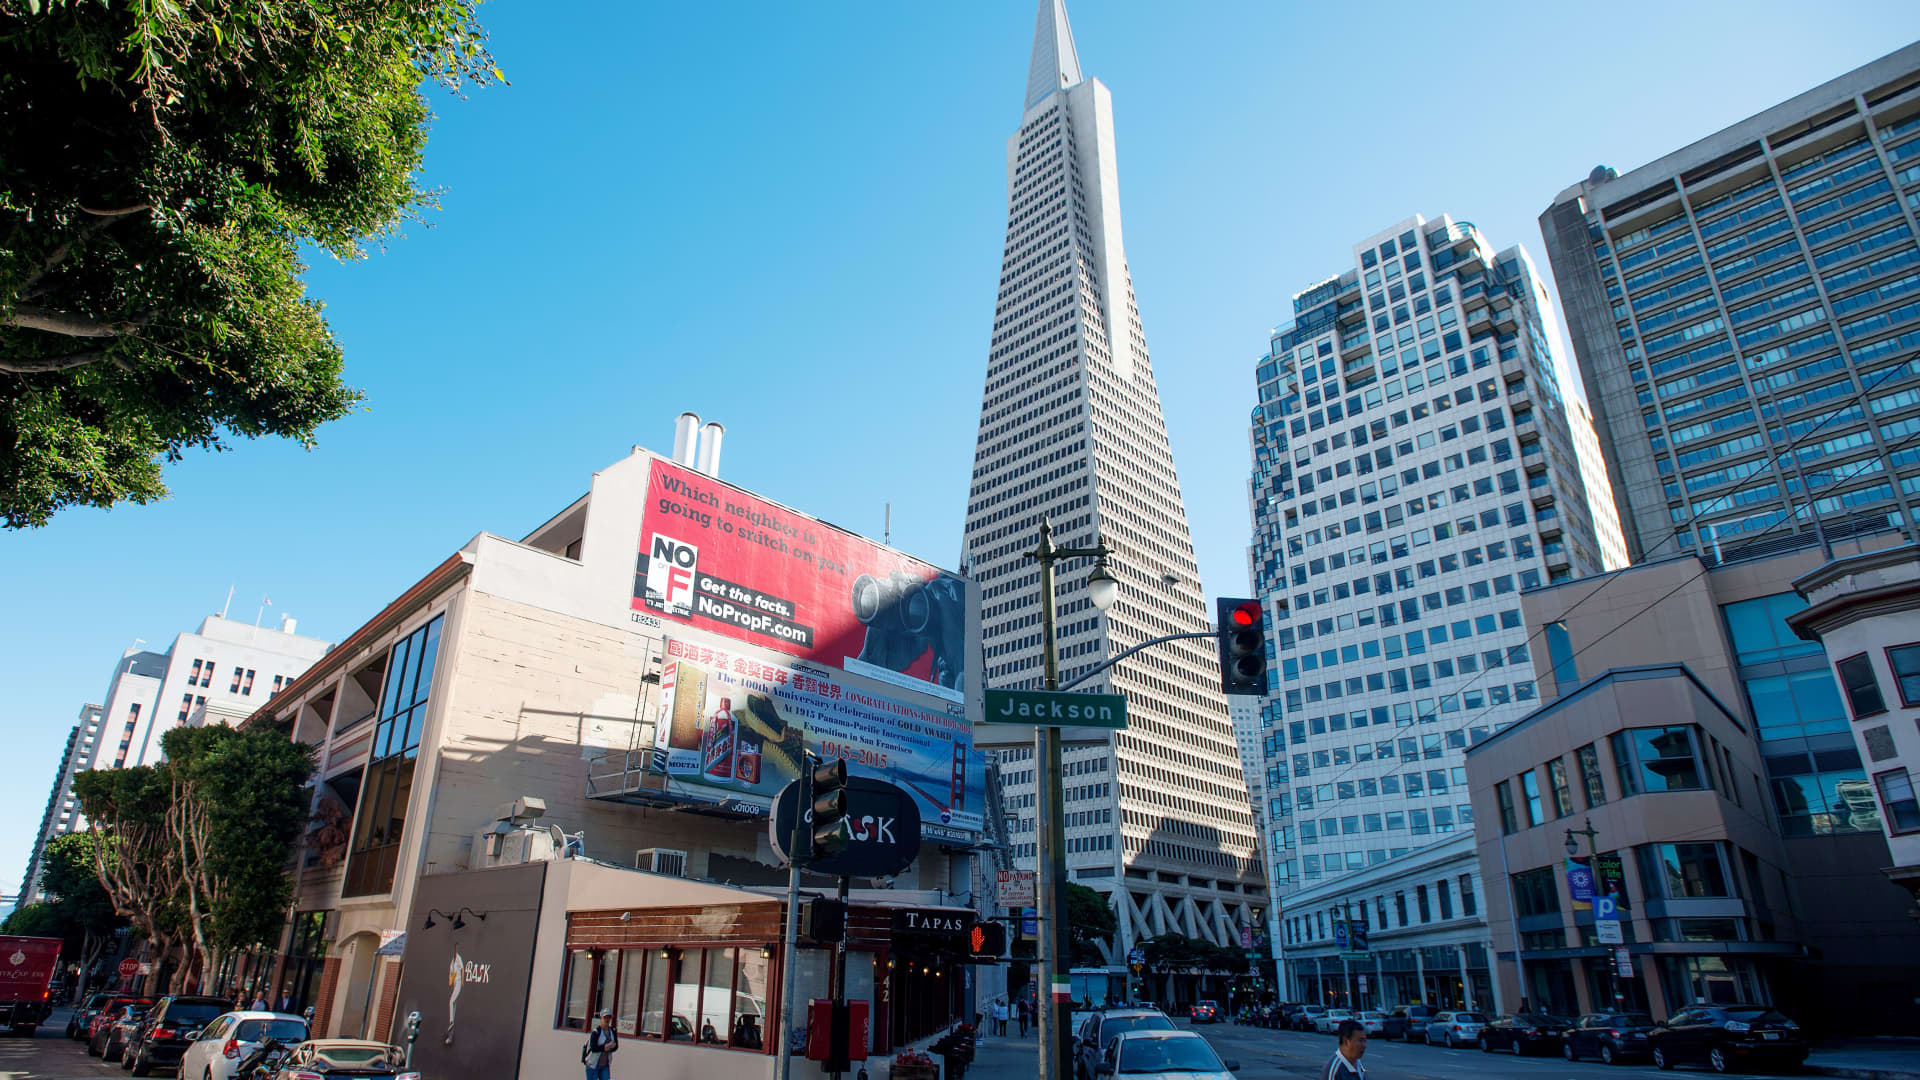 San Francisco slow recovery from Covid is struggle for small business